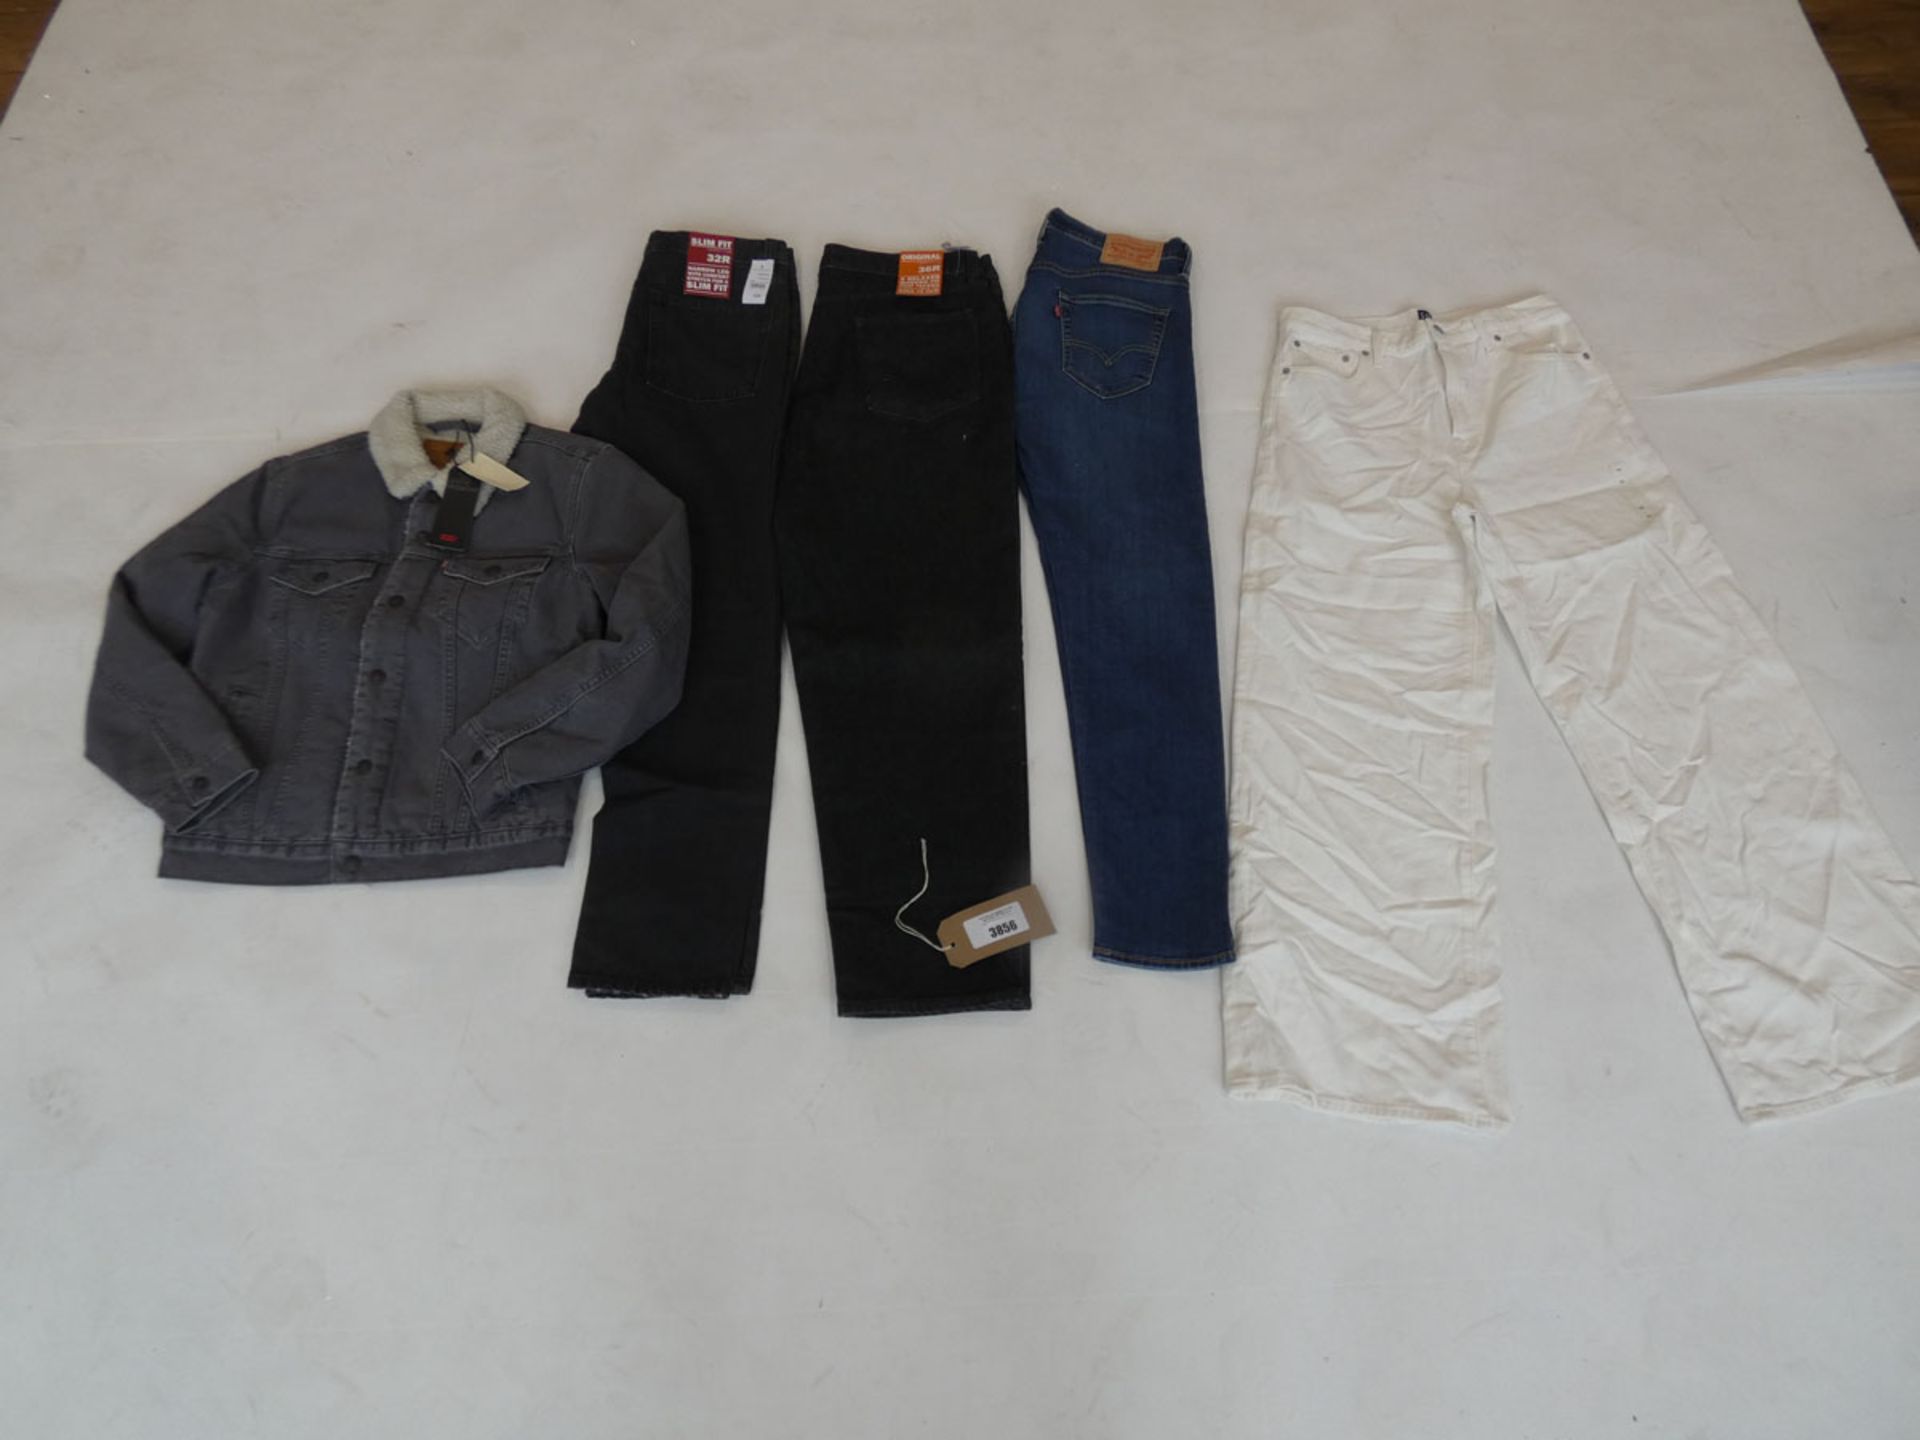 Selection of denim wear to include Red Herring, Levi and GAP - in various sizes